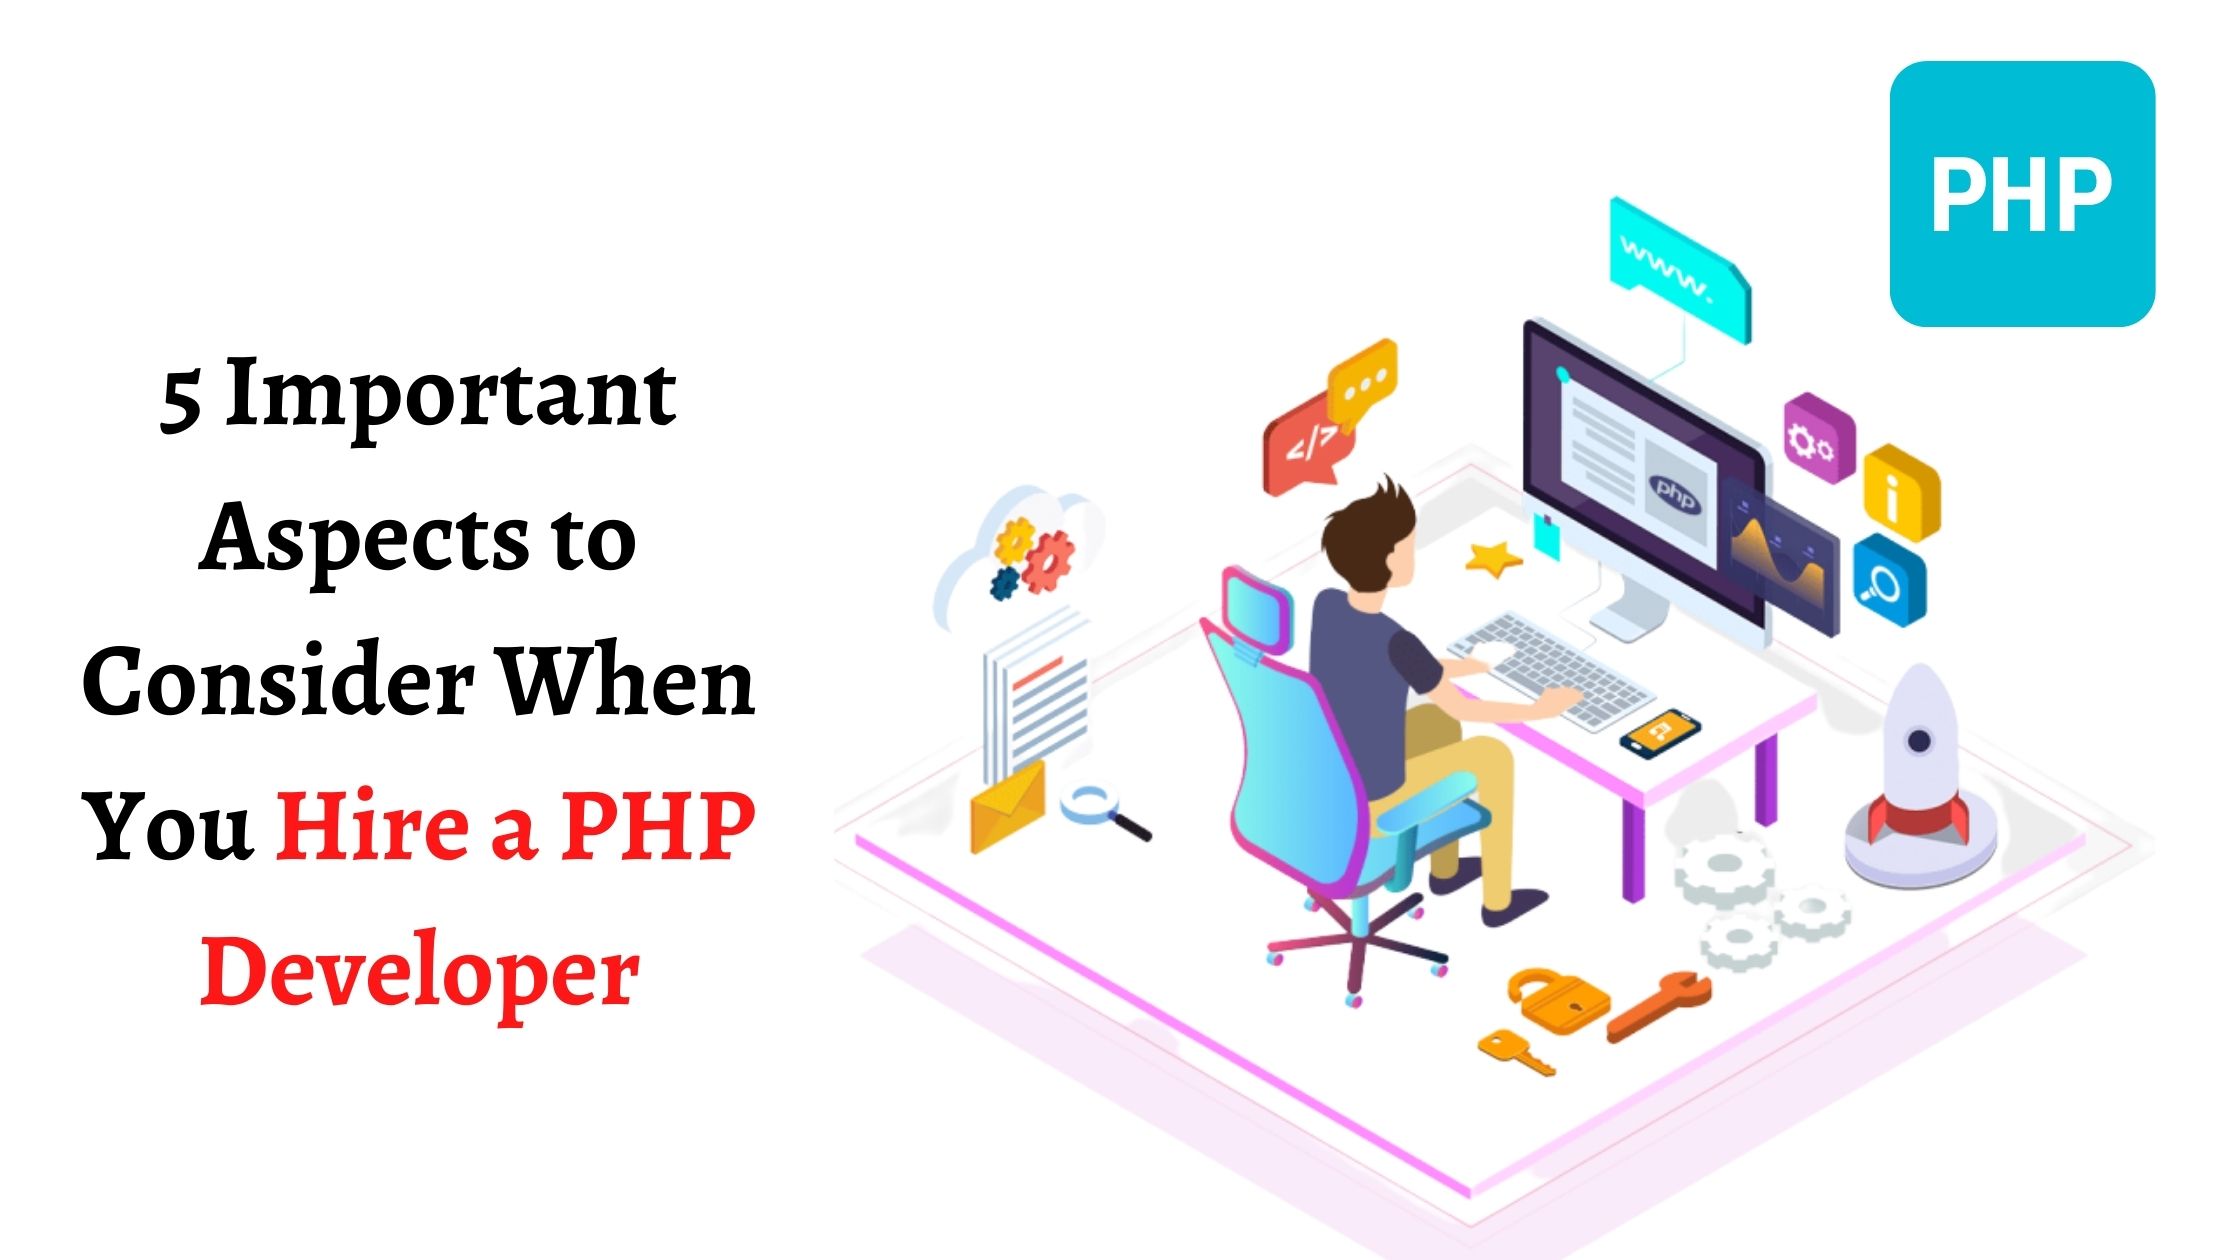 5 Important Aspects to Consider When You Hire a PHP Developer